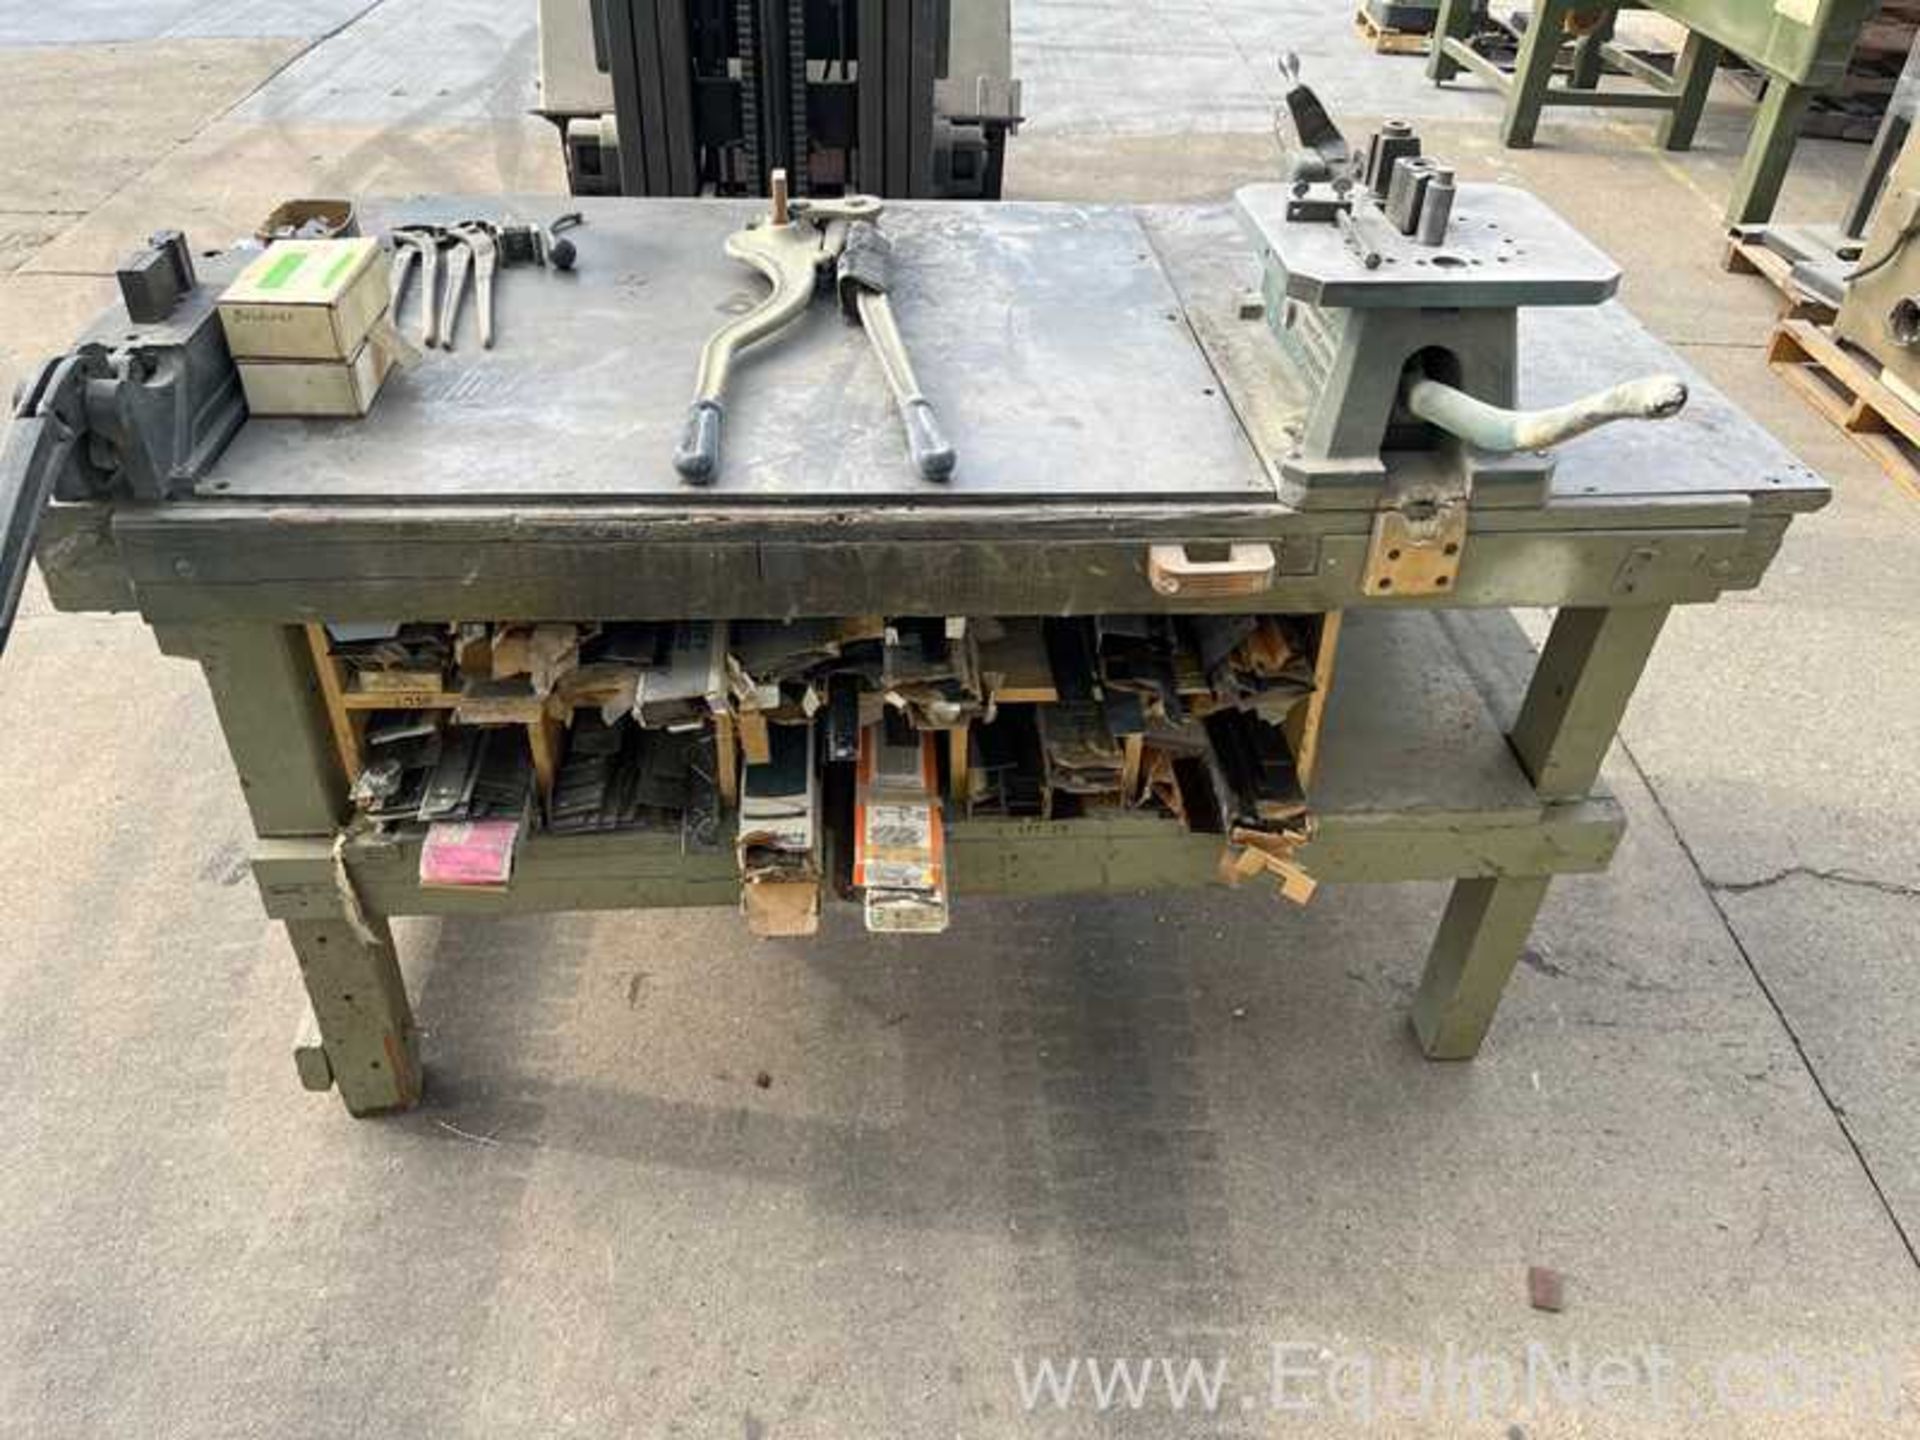 Steel Rule Die Tables with All Bending Tools and Miscellaneous Die Rule In Boxes